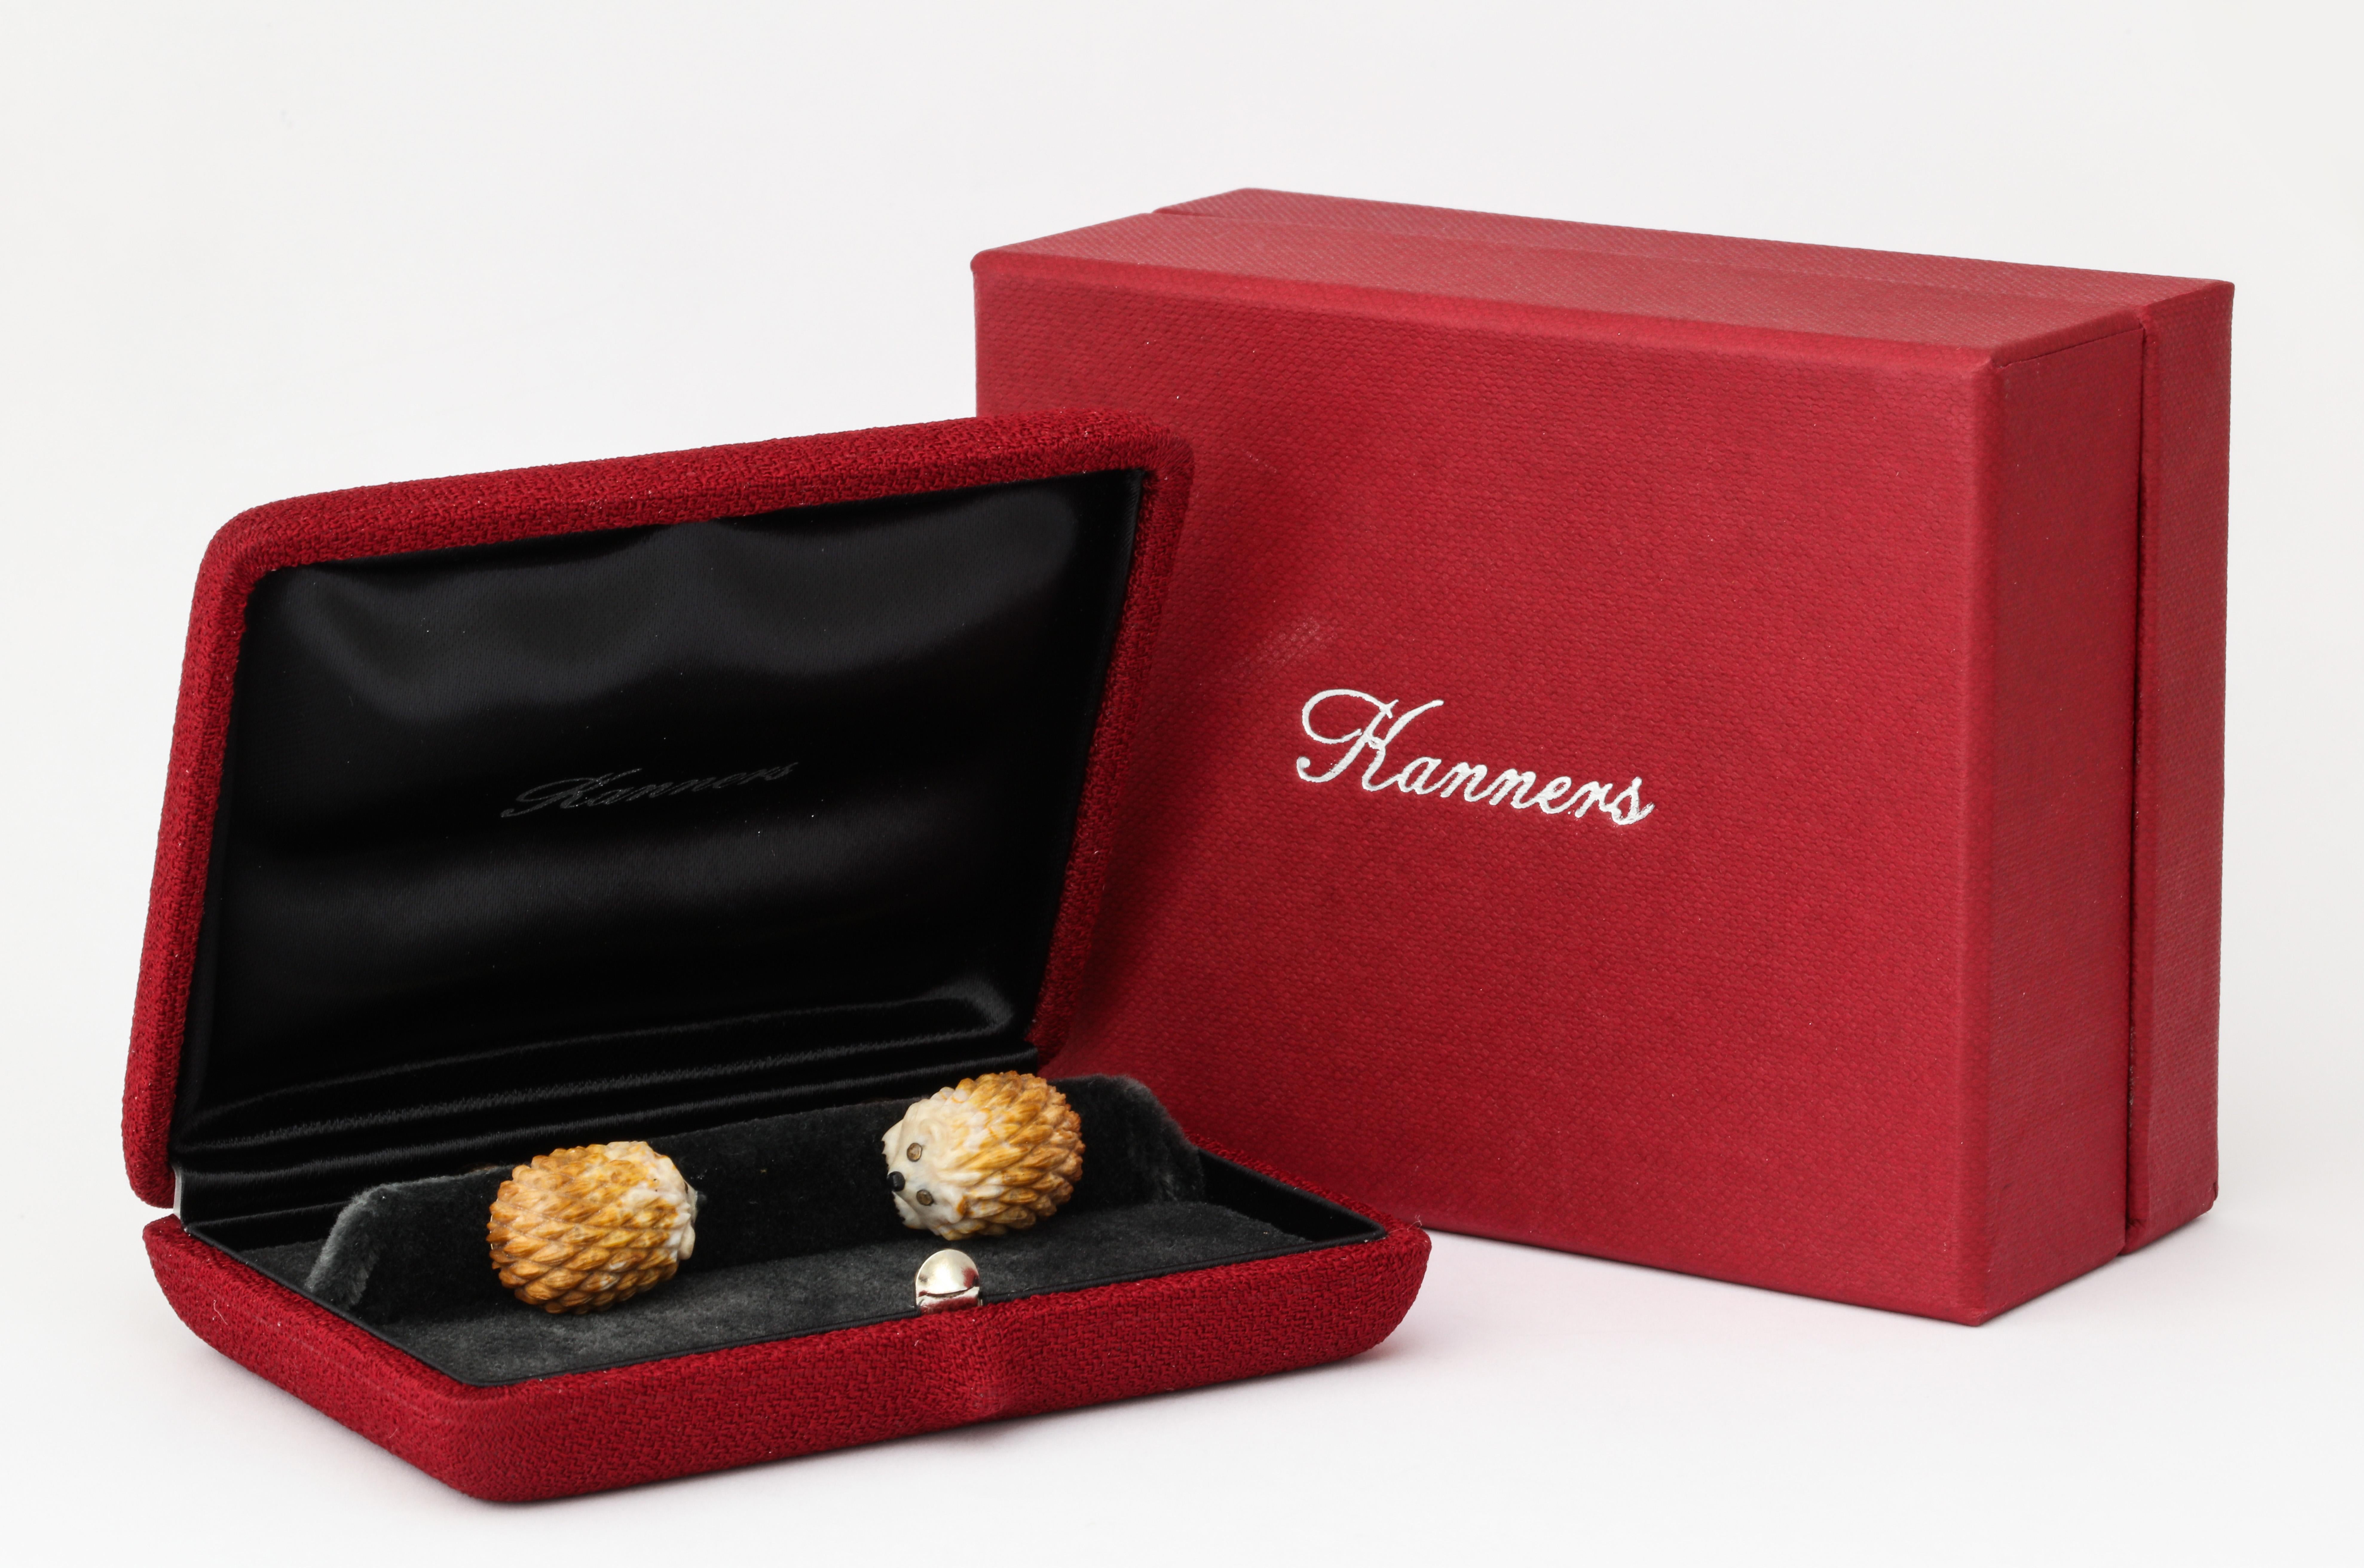 Michael Kanners Hedgehog Cufflinks In New Condition For Sale In Bal Harbour, FL